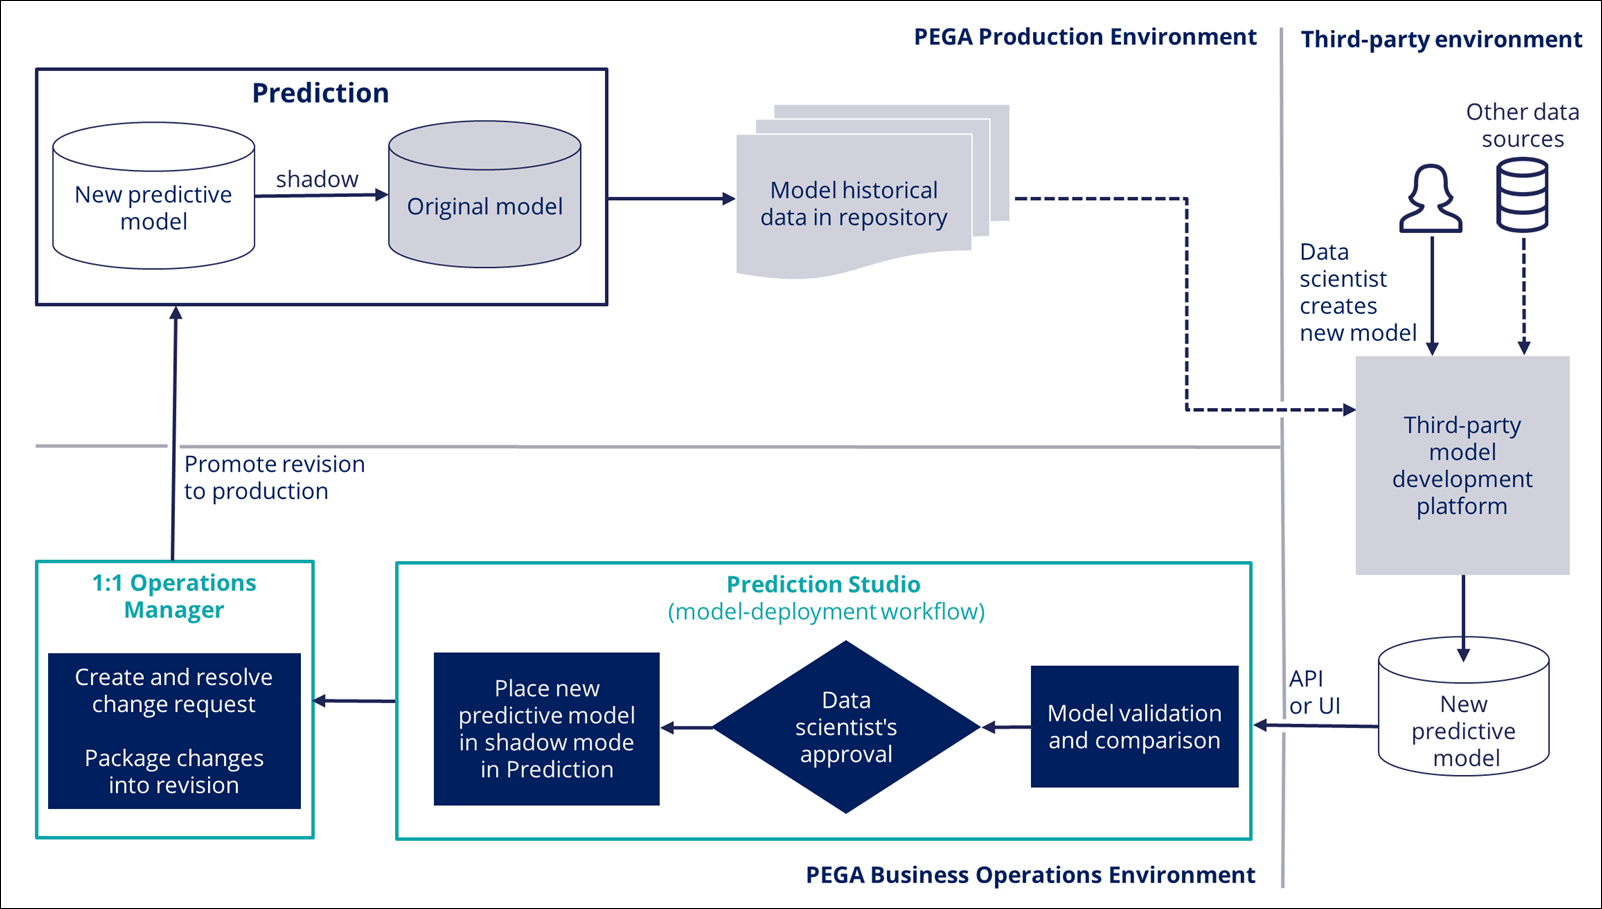 A model update process in an environment with Pega Customer Decision Hub and Pega 1 to 1 Operations Manager, showing the workflow from third-party environment through BOE to production.